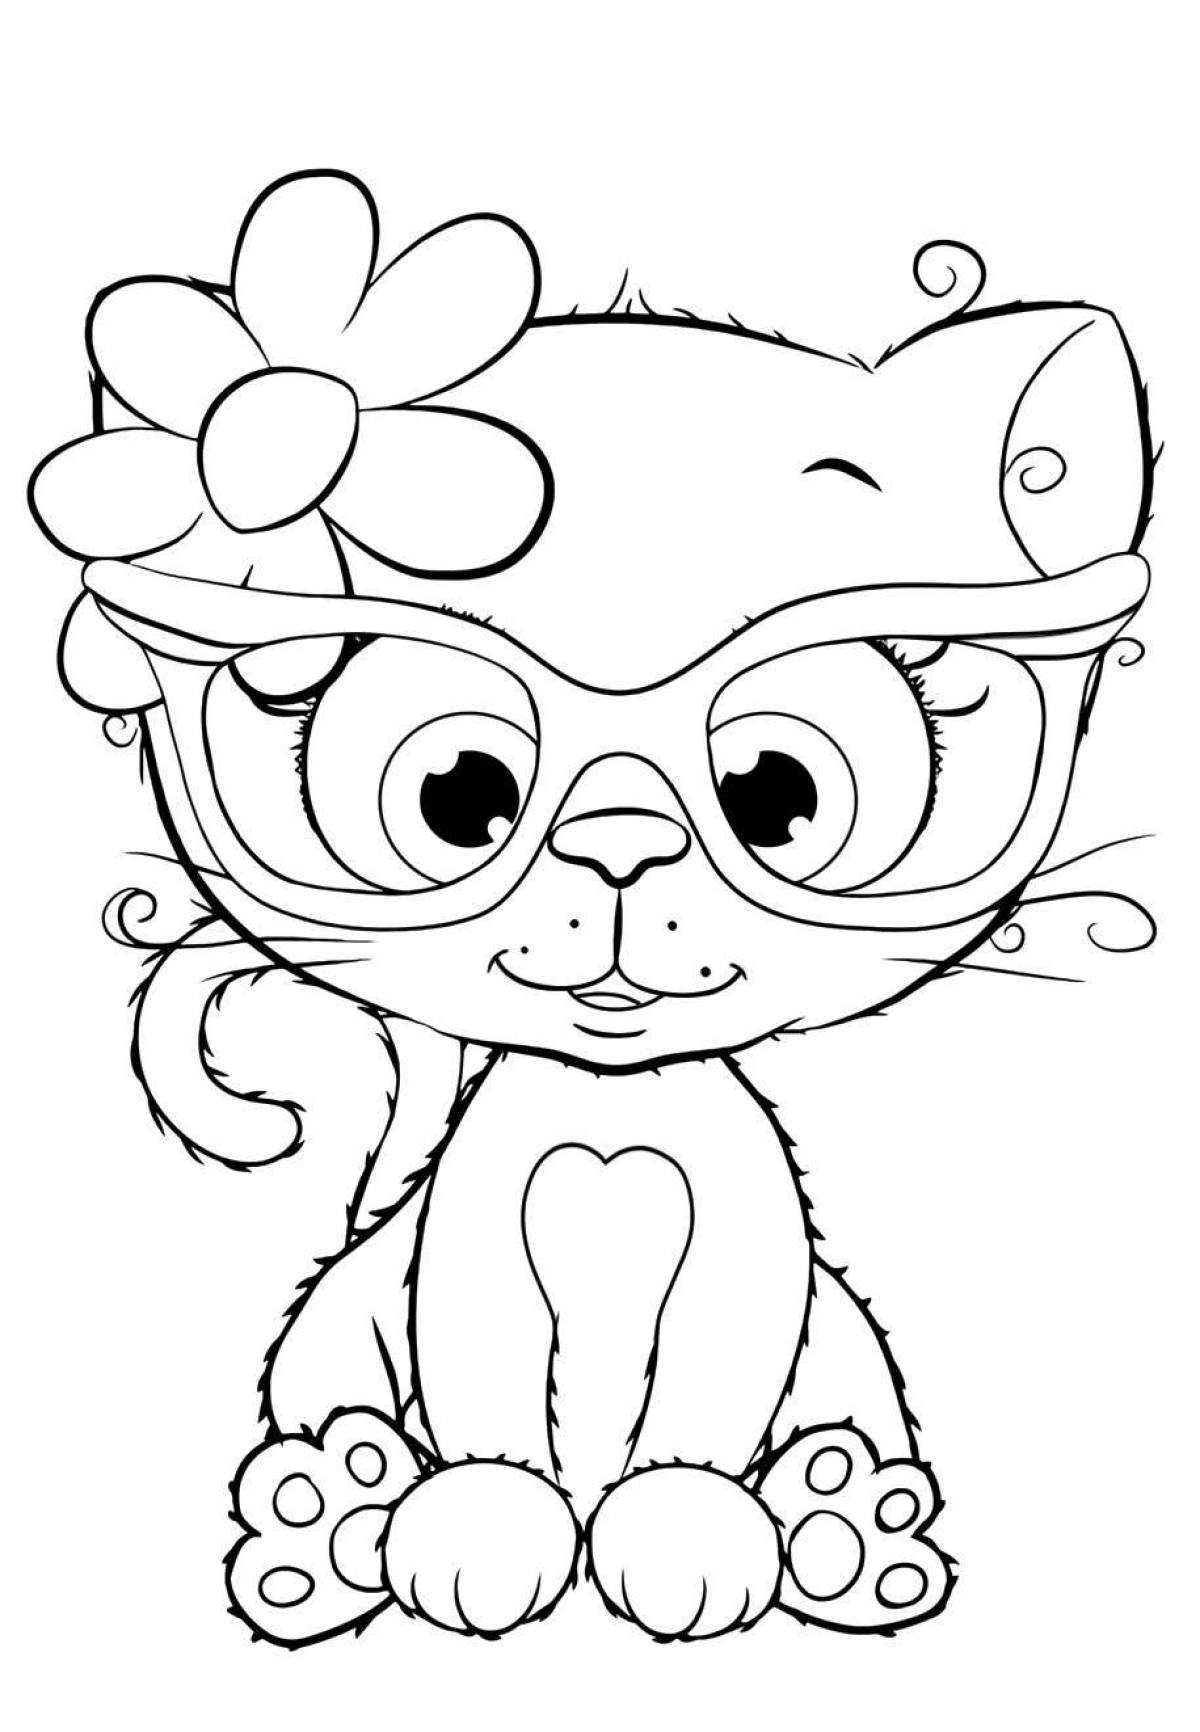 Fancy coloring cute cats for girls